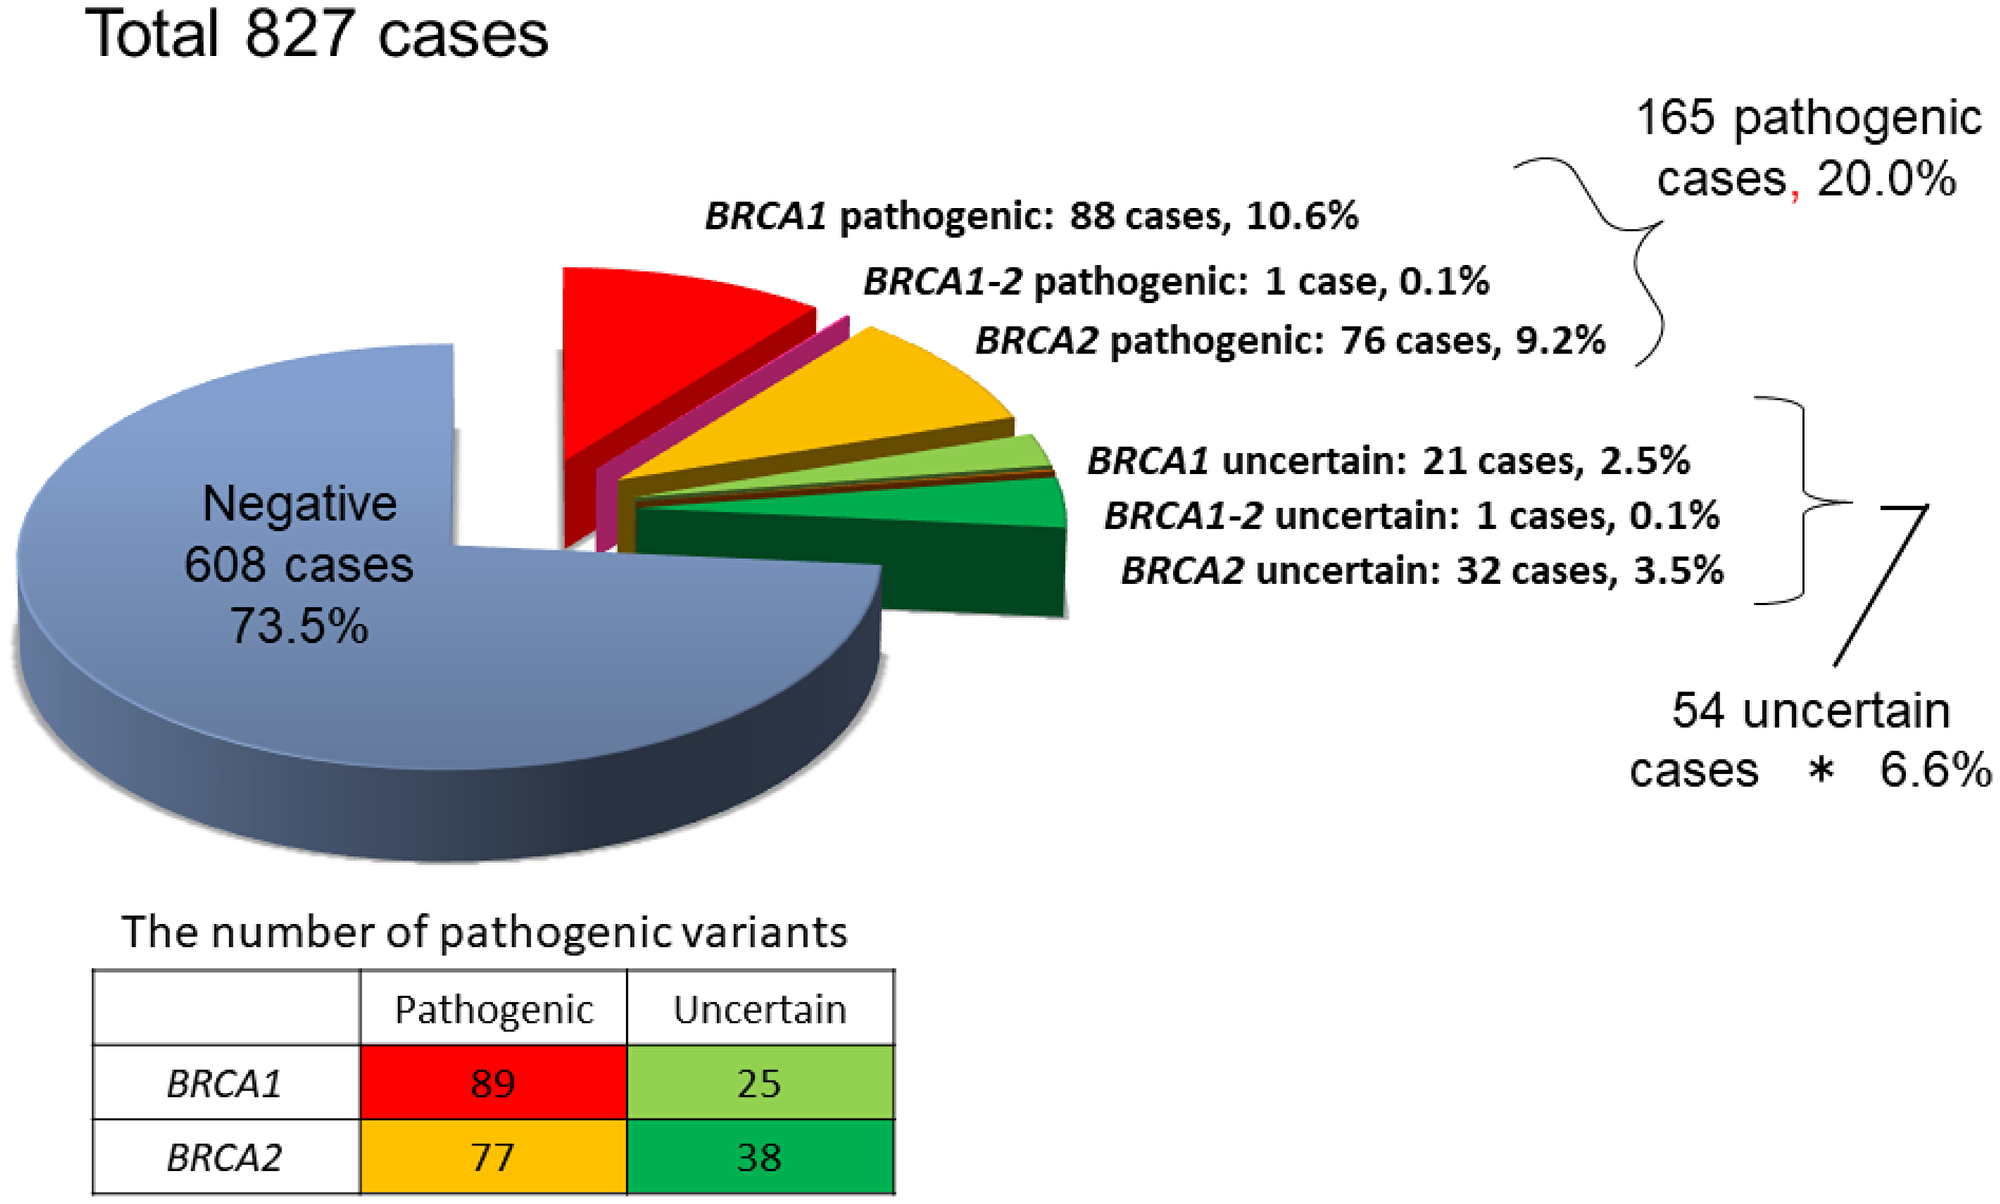 Results of BRCA1/2 genetic testing of 827 patients.